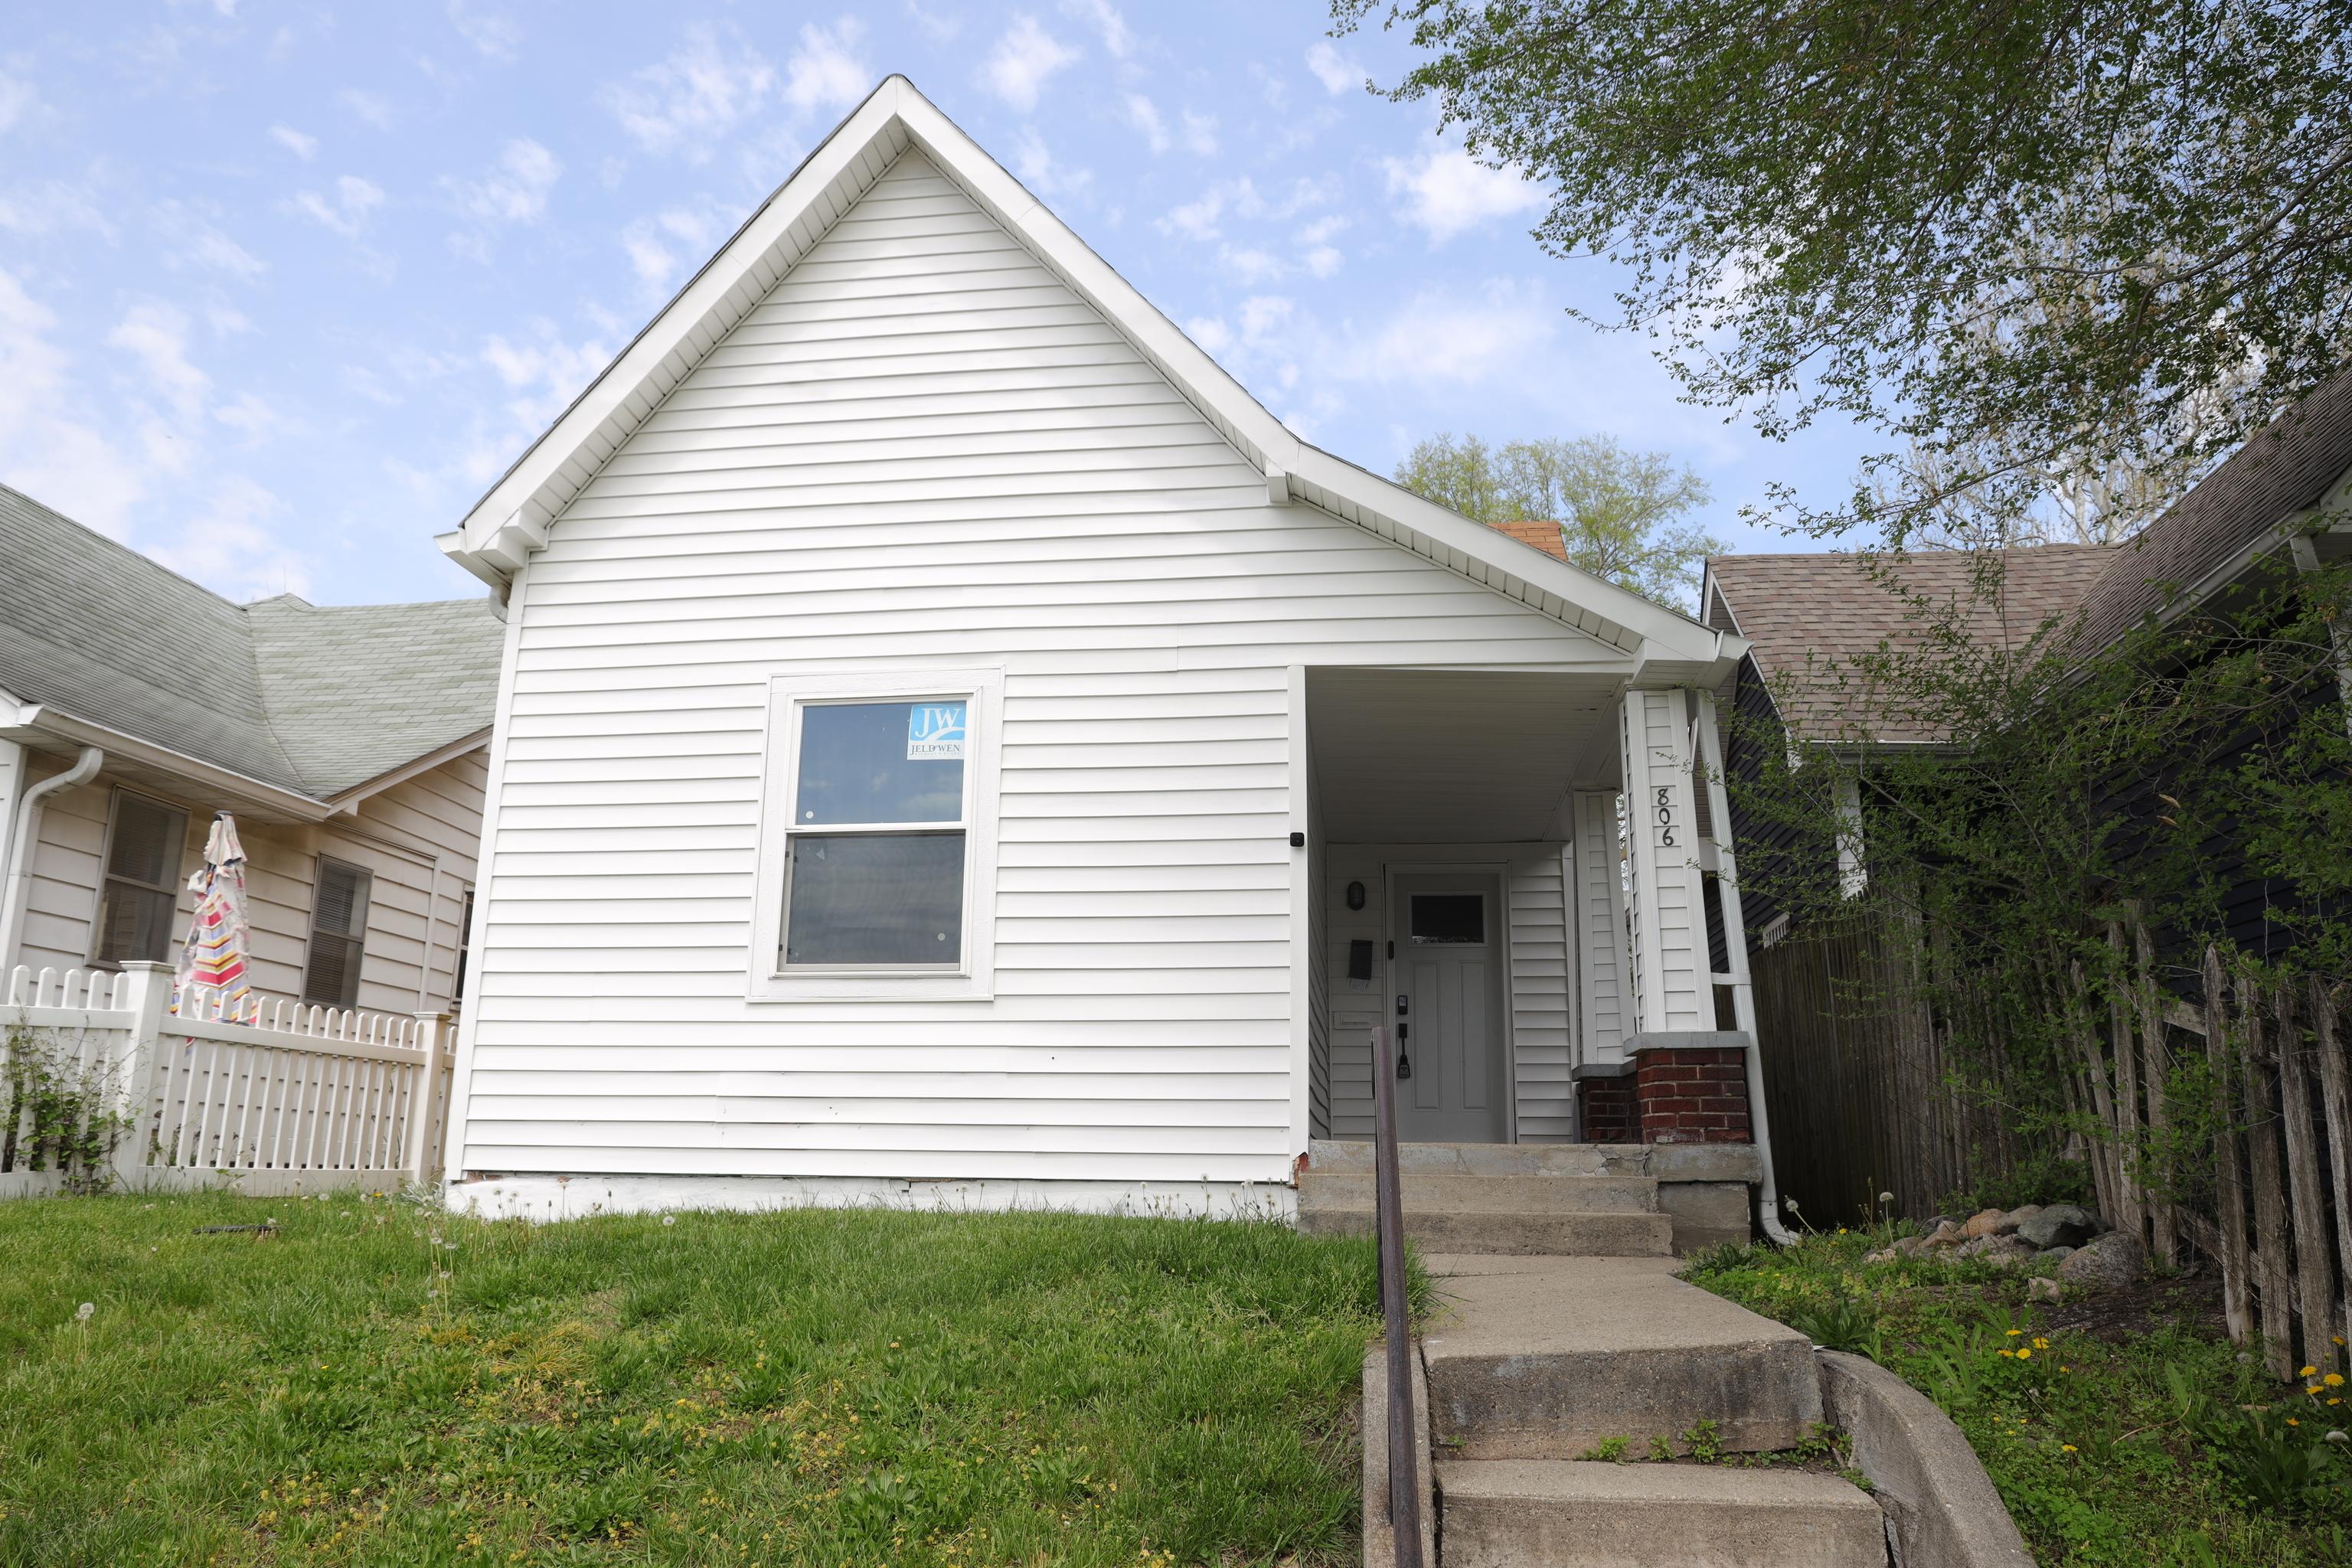 Photo one of 806 W 27Th St Indianapolis IN 46208 | MLS 21974403